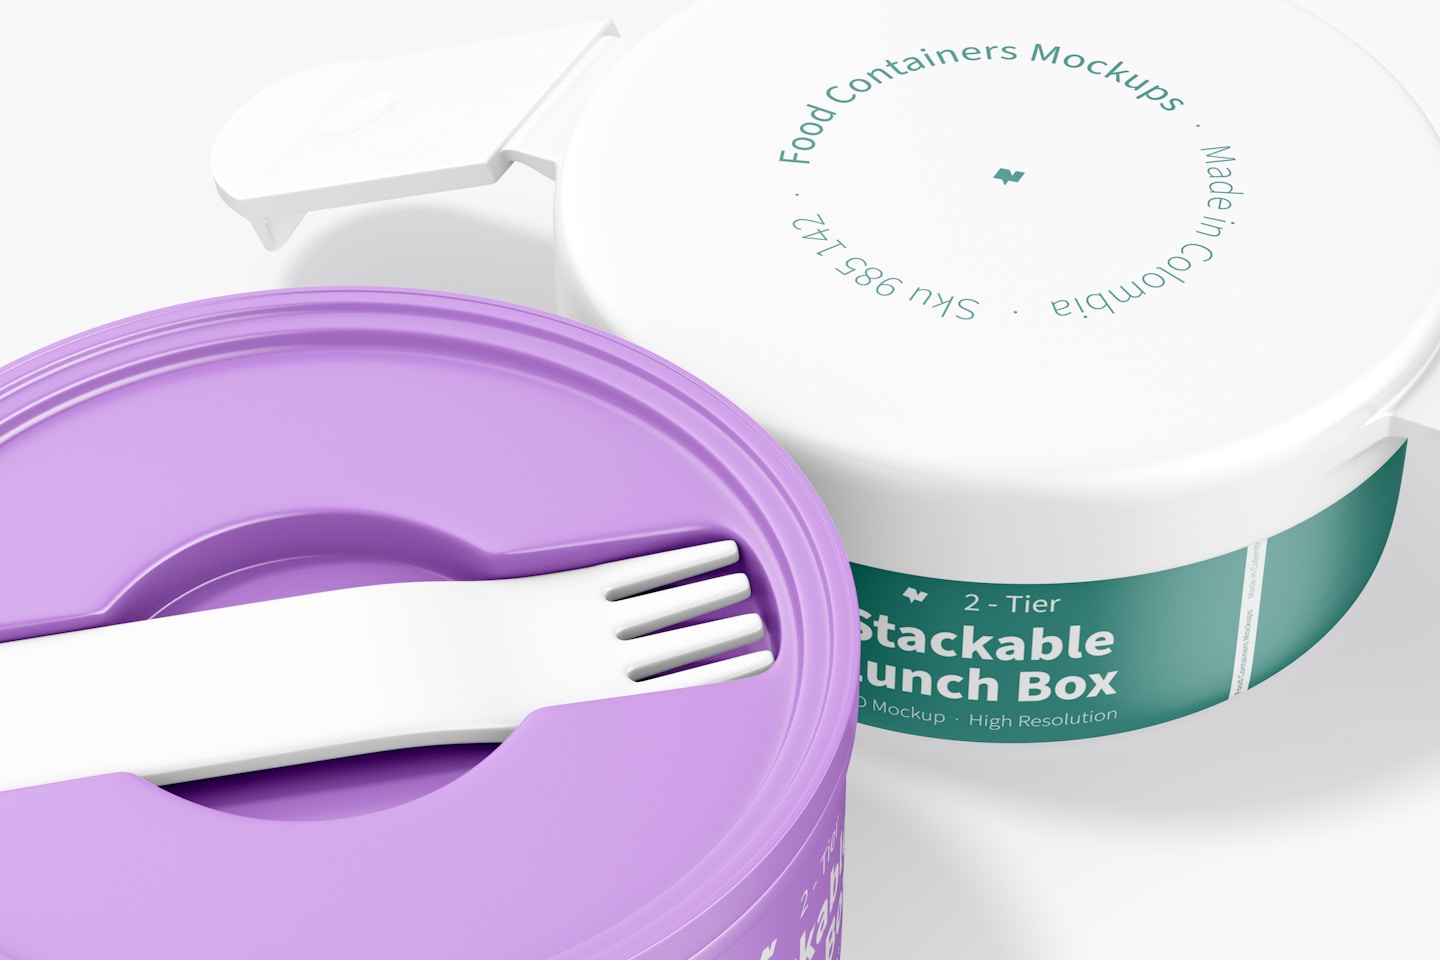 2-Tier Stackable Lunch Box Mockup, Close Up